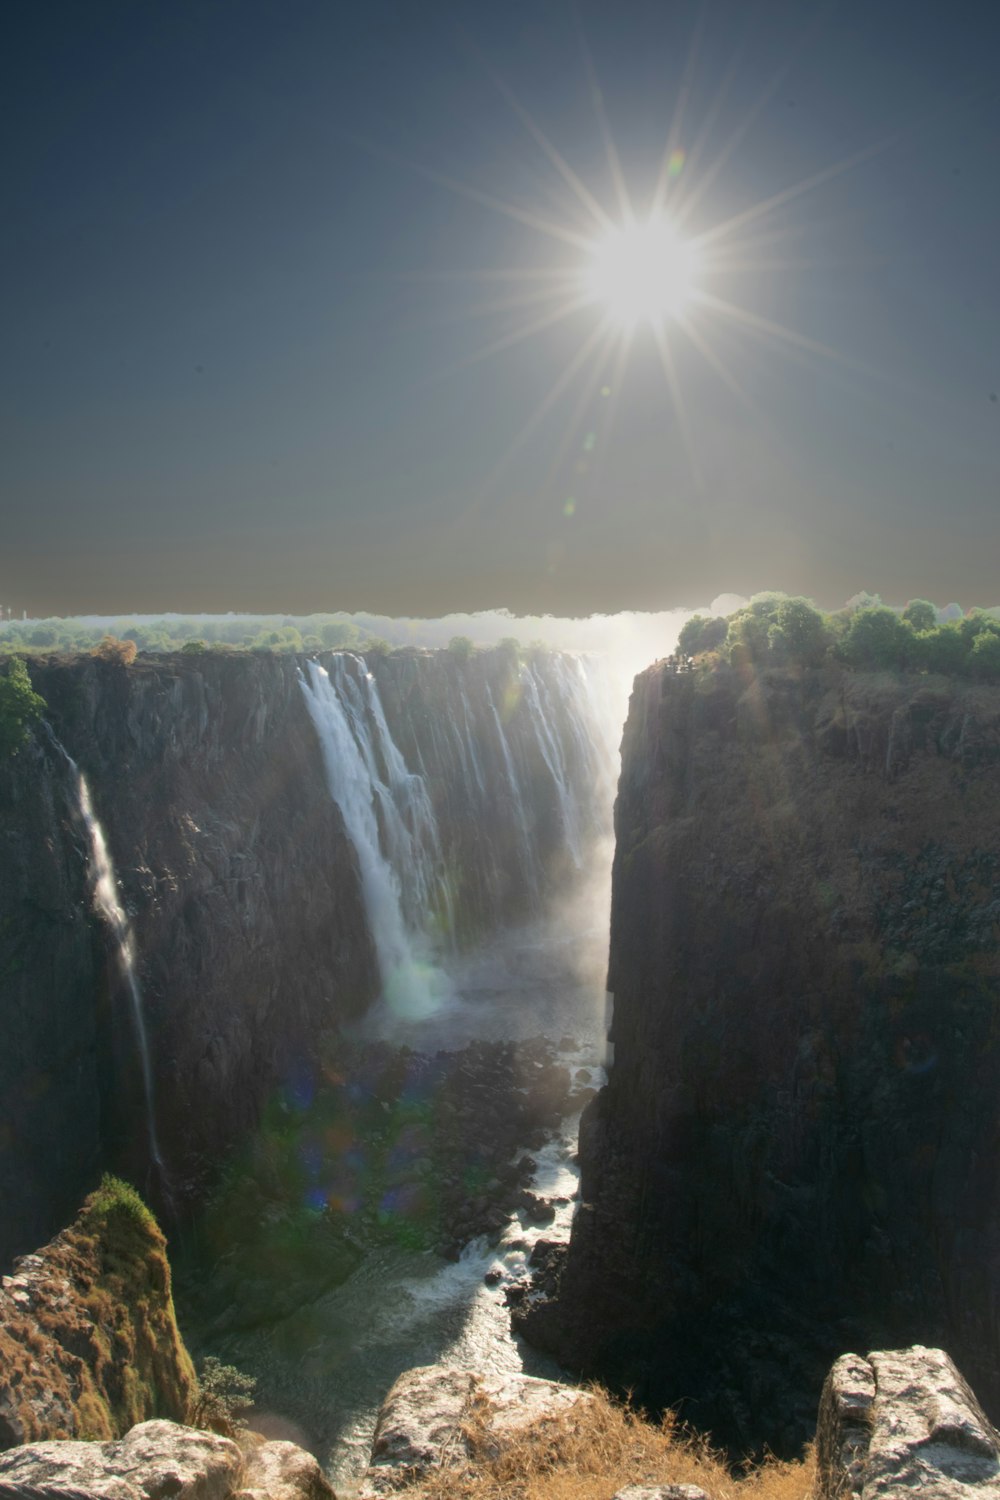 the sun shines brightly over a large waterfall